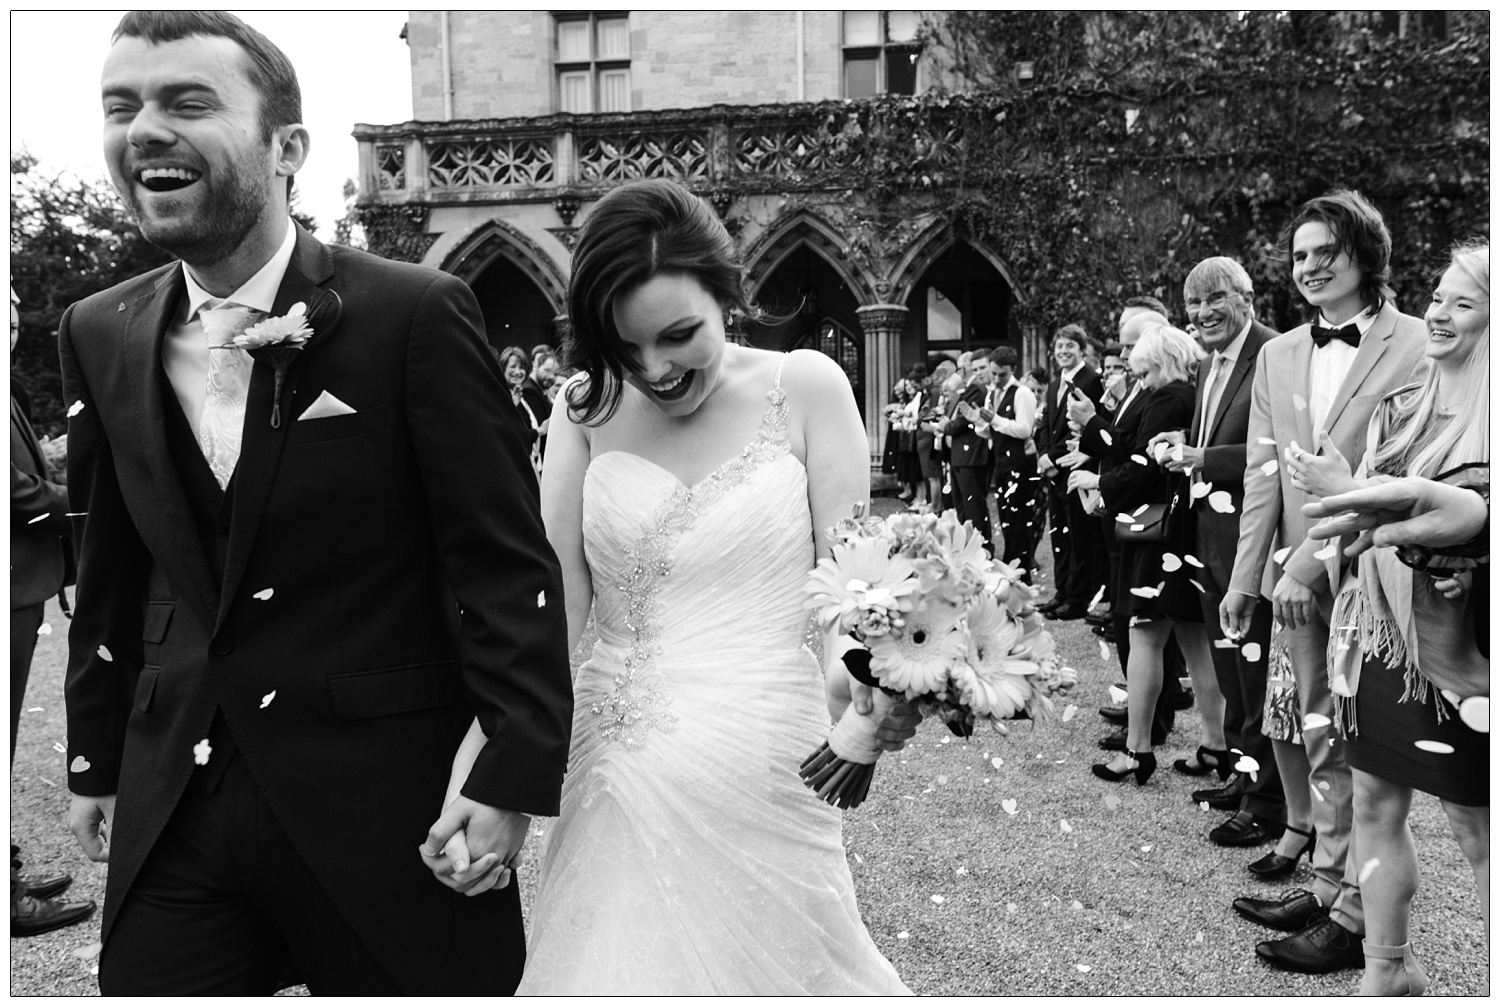 At Manor by the Lake wedding venue, a black and white photograph of man and woman holding hands. They just walked through a tunnel of guests throwing confetti.